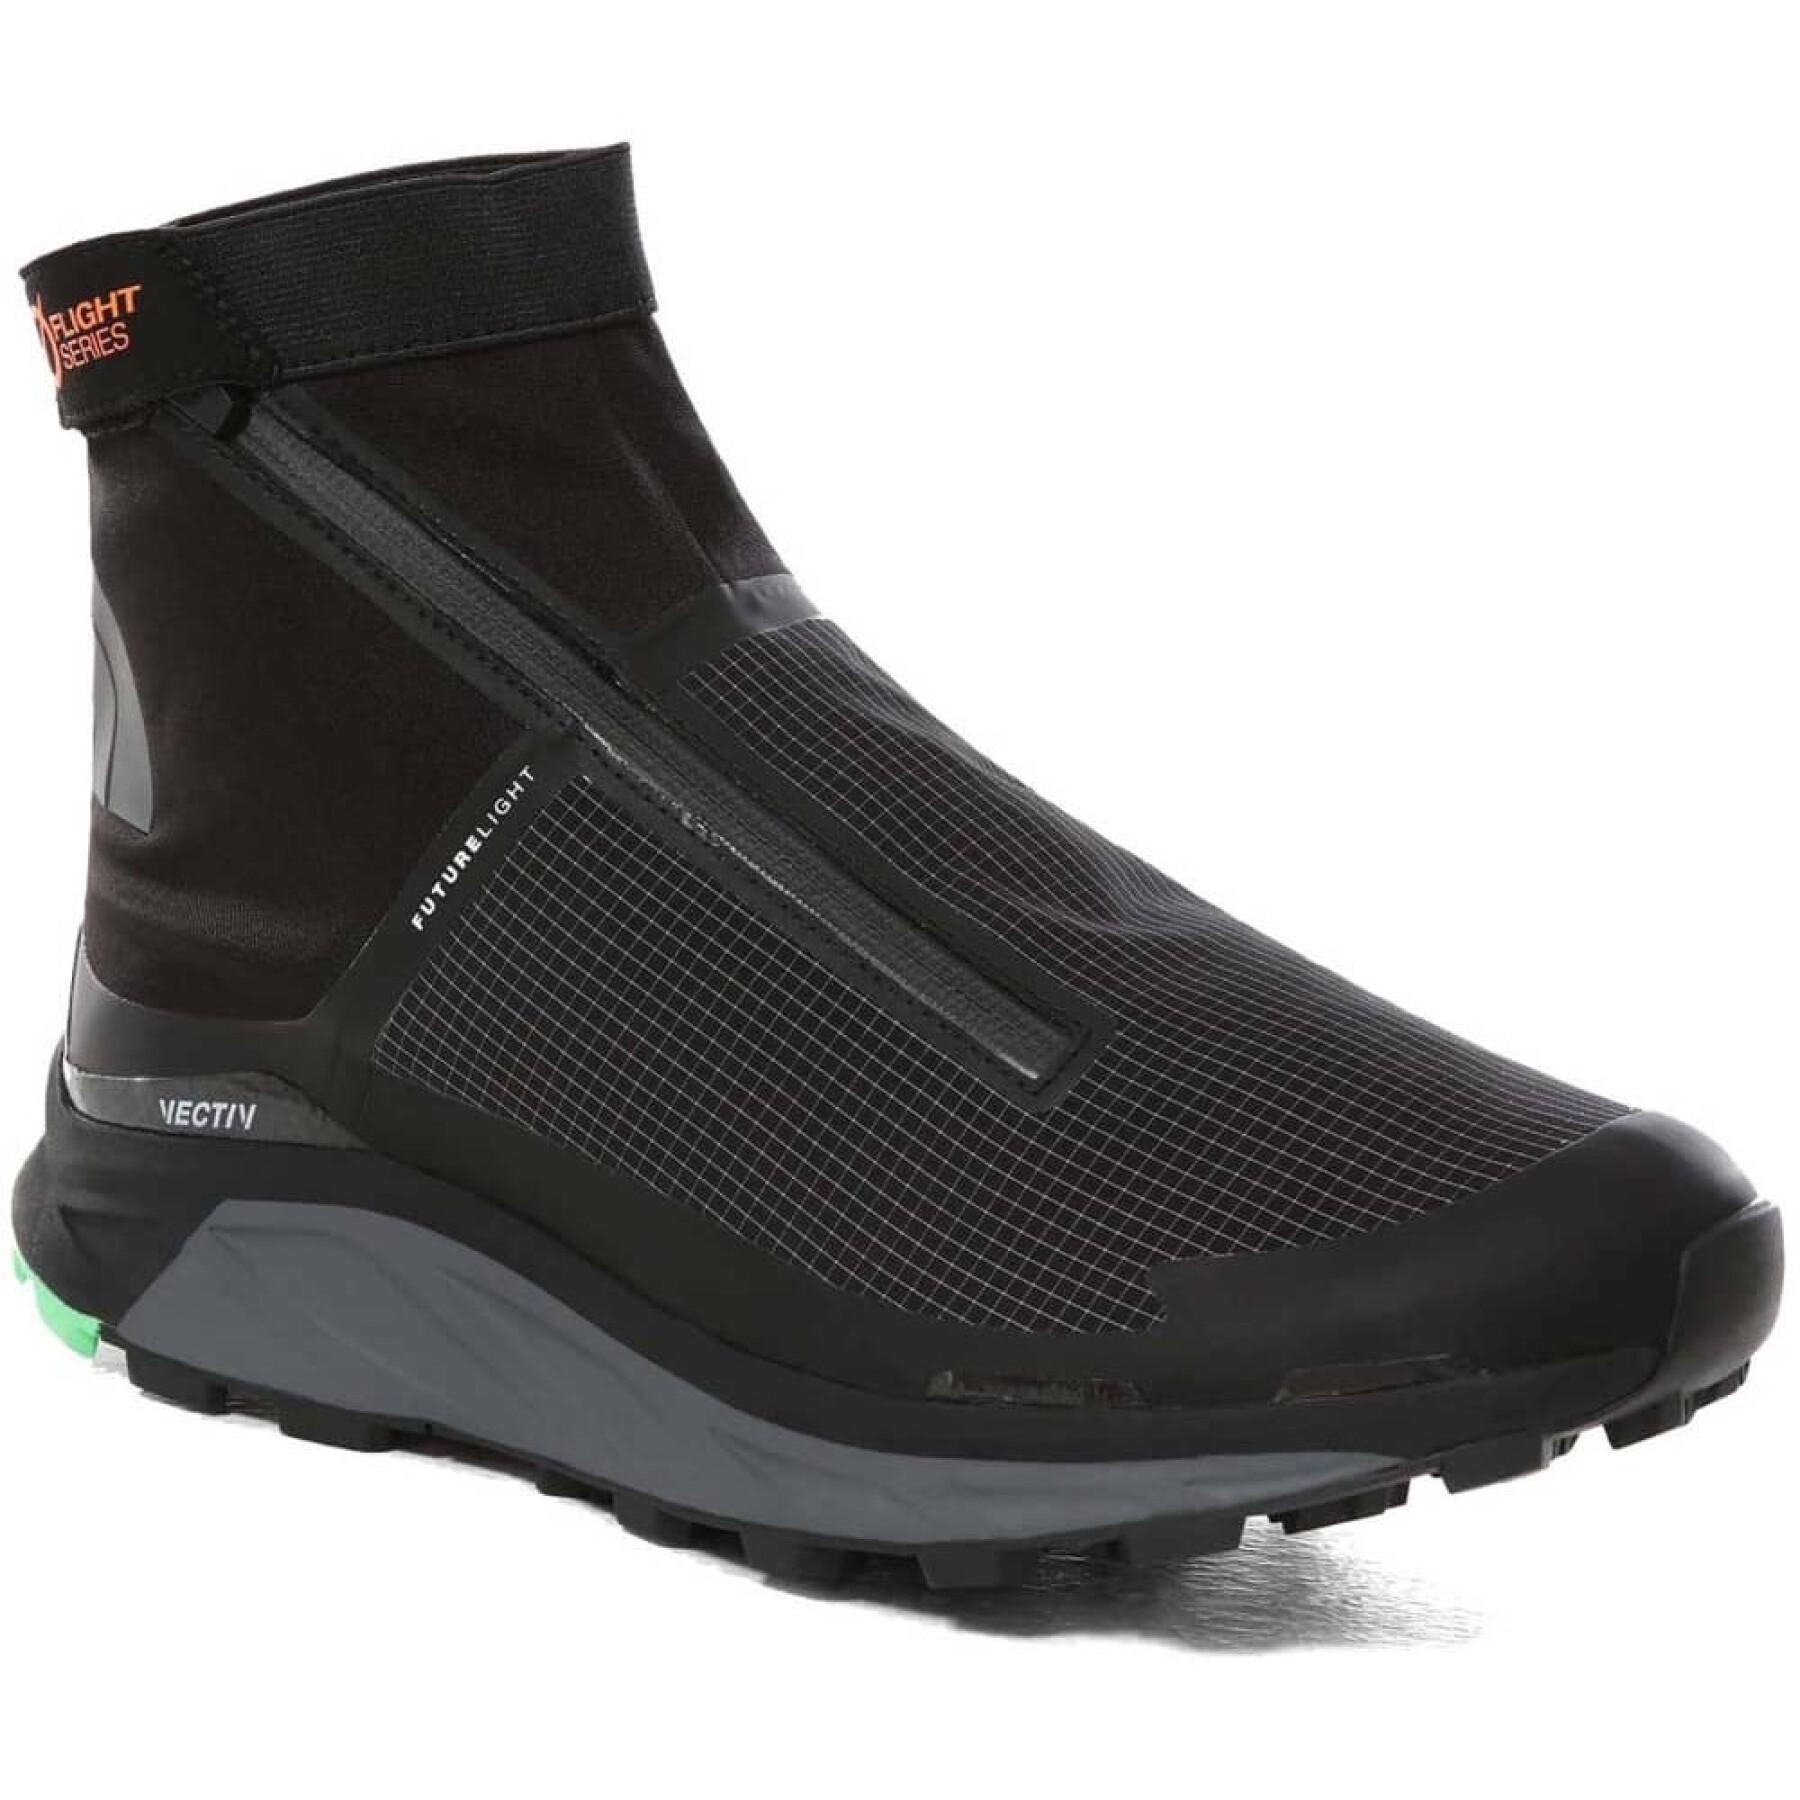 Trail running shoes The North Face Flight vectiv guard futureLight™